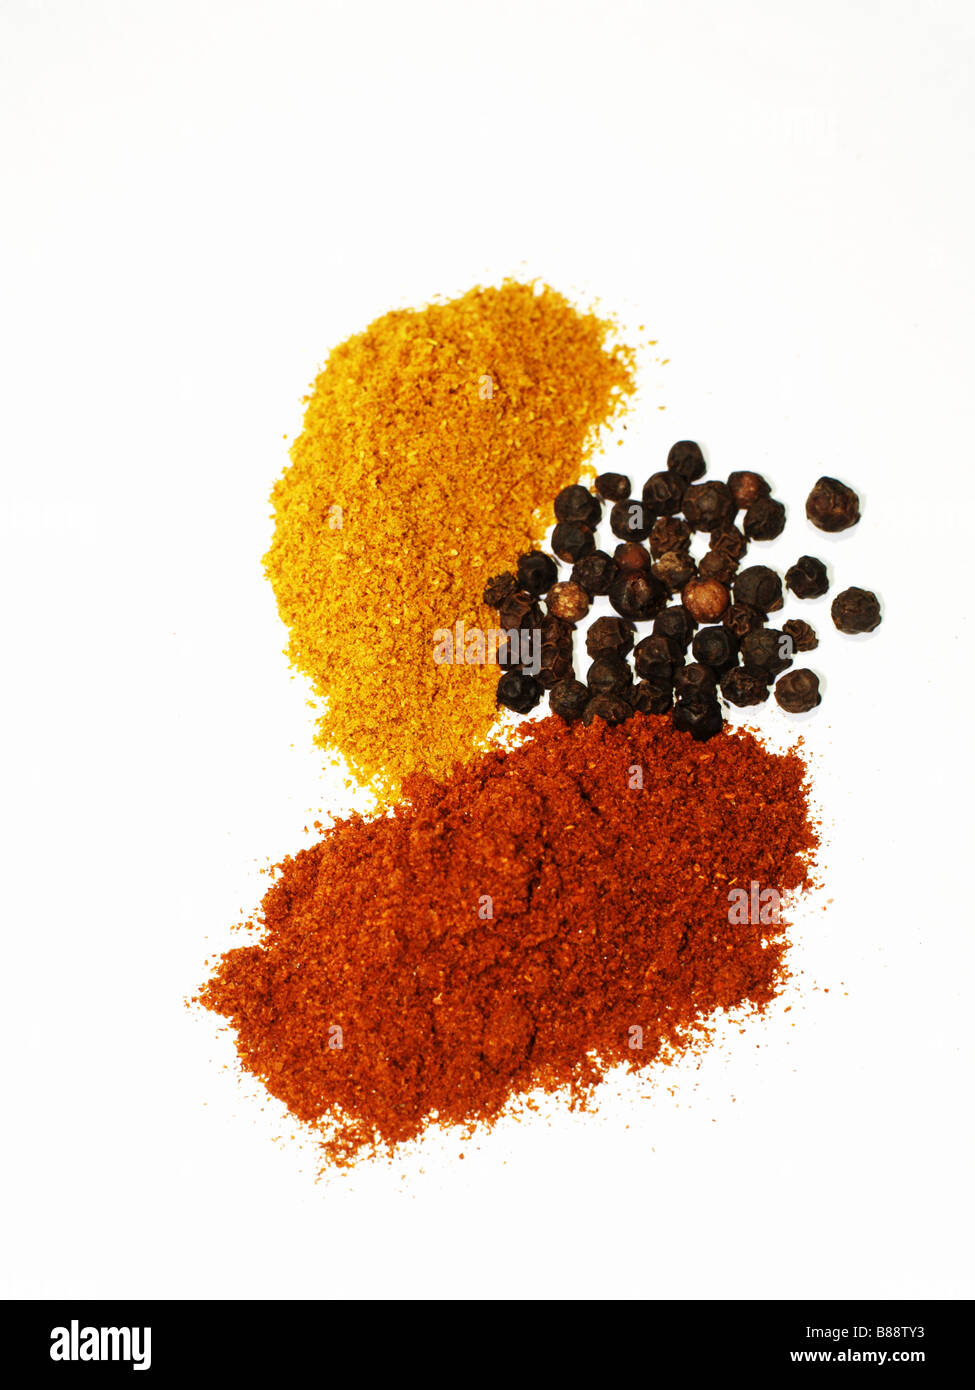 Spices on a white background. Stock Photo